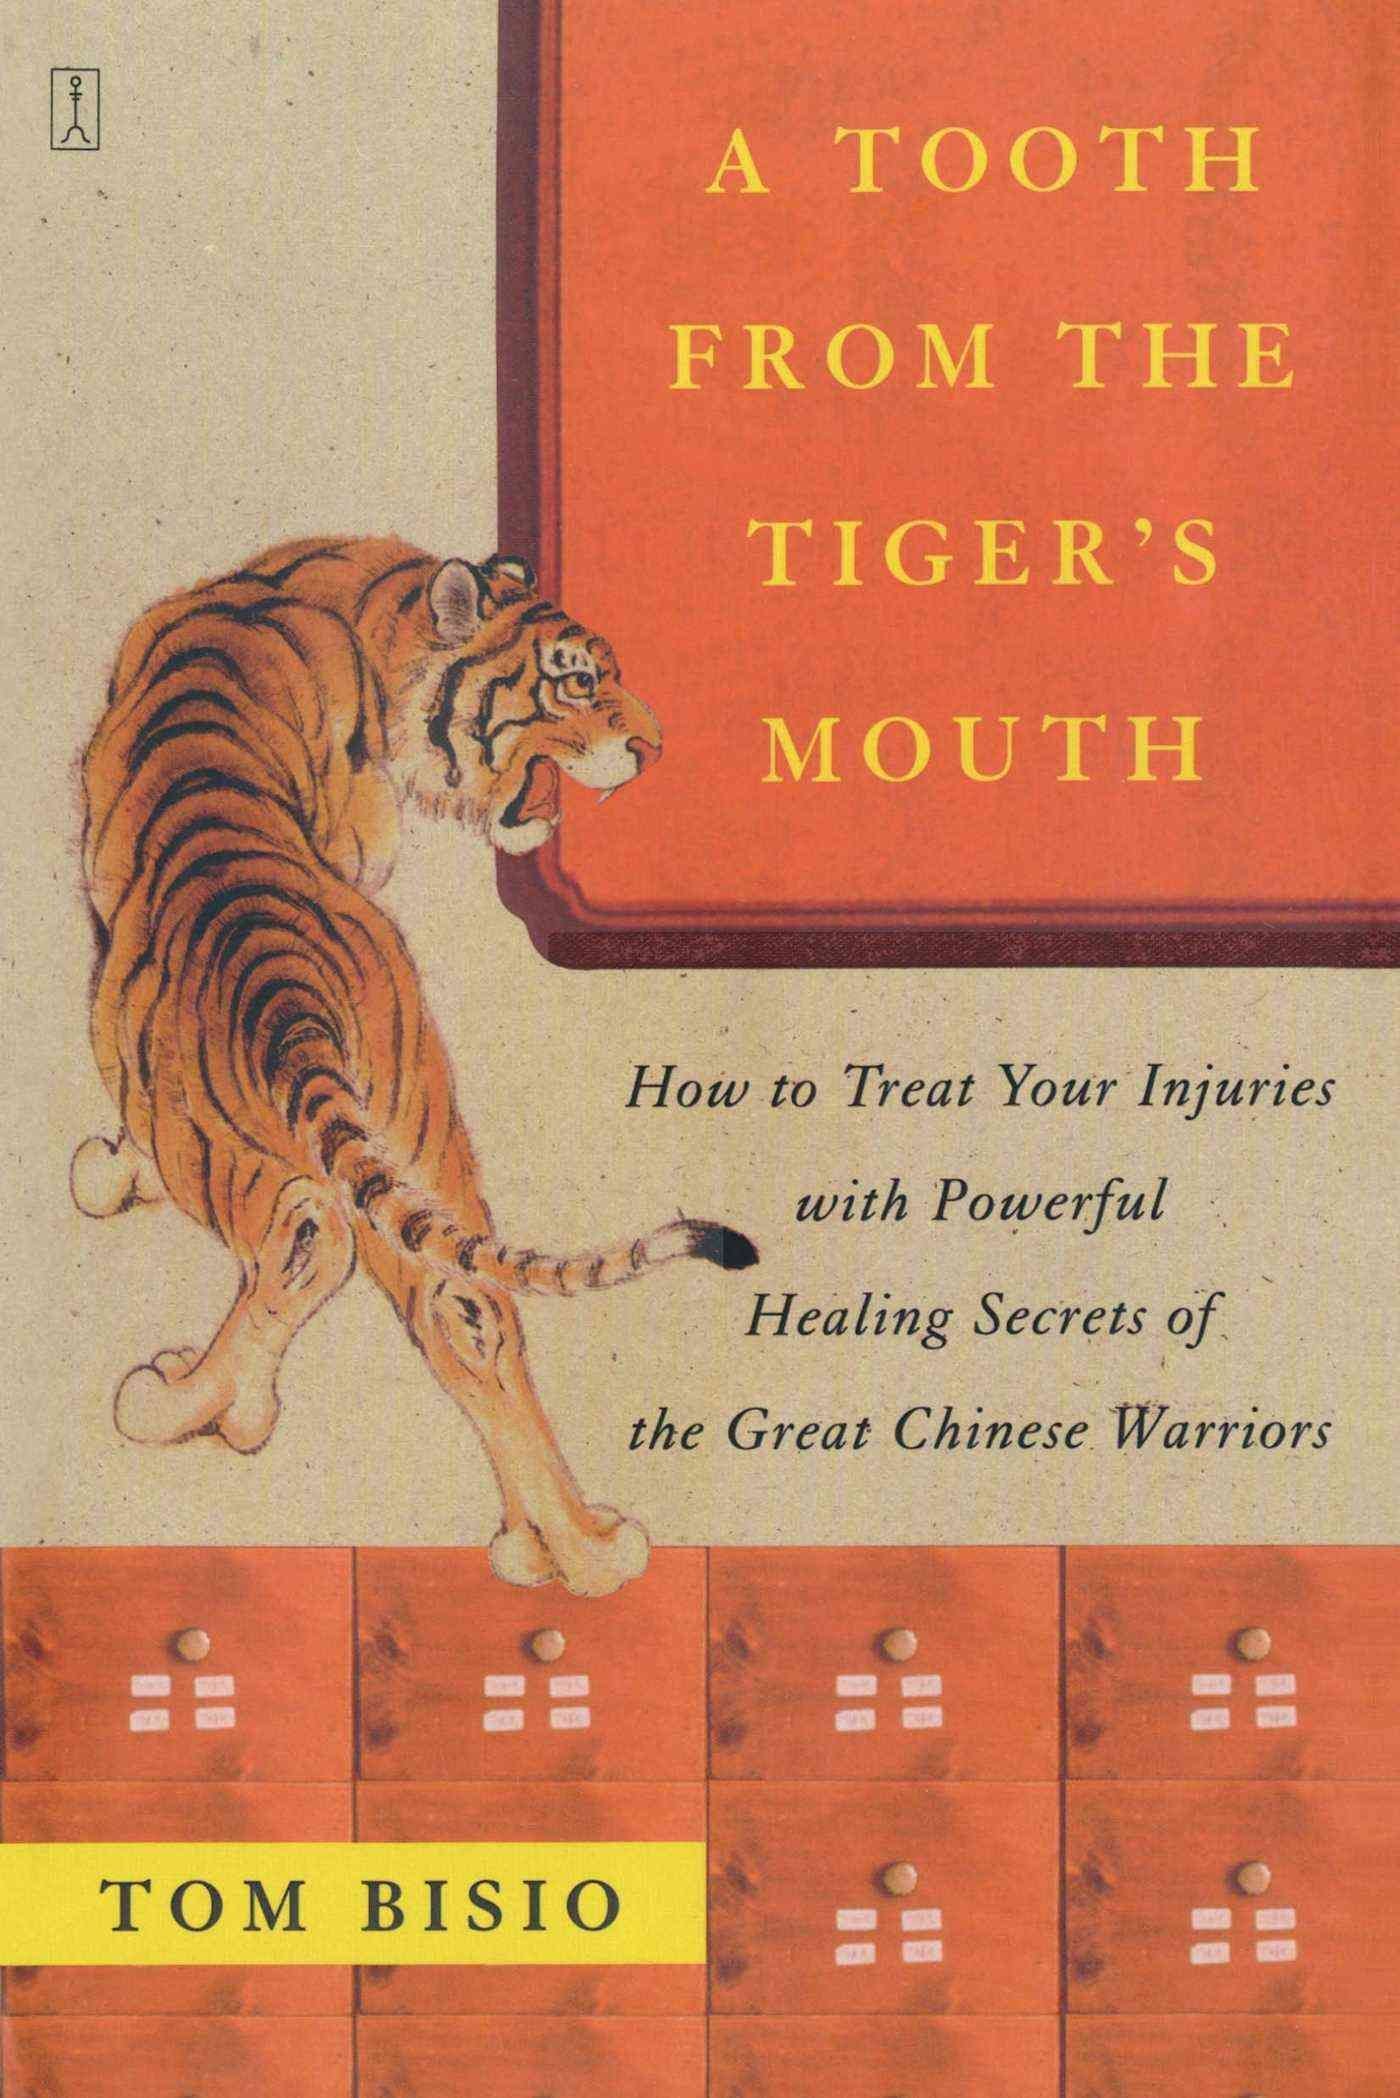 A Tooth from the Tiger's Mouth